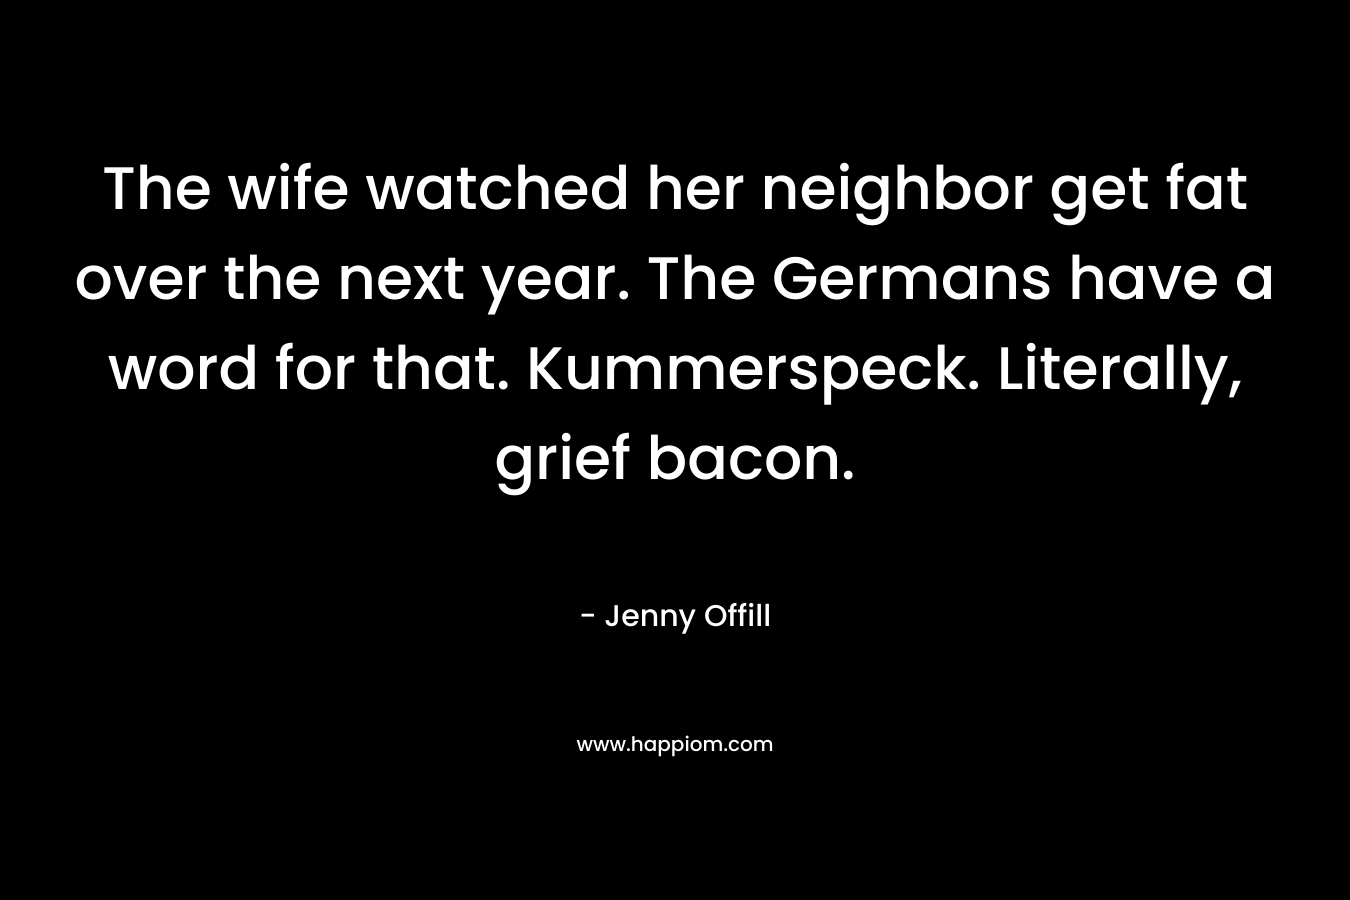 The wife watched her neighbor get fat over the next year. The Germans have a word for that. Kummerspeck. Literally, grief bacon.